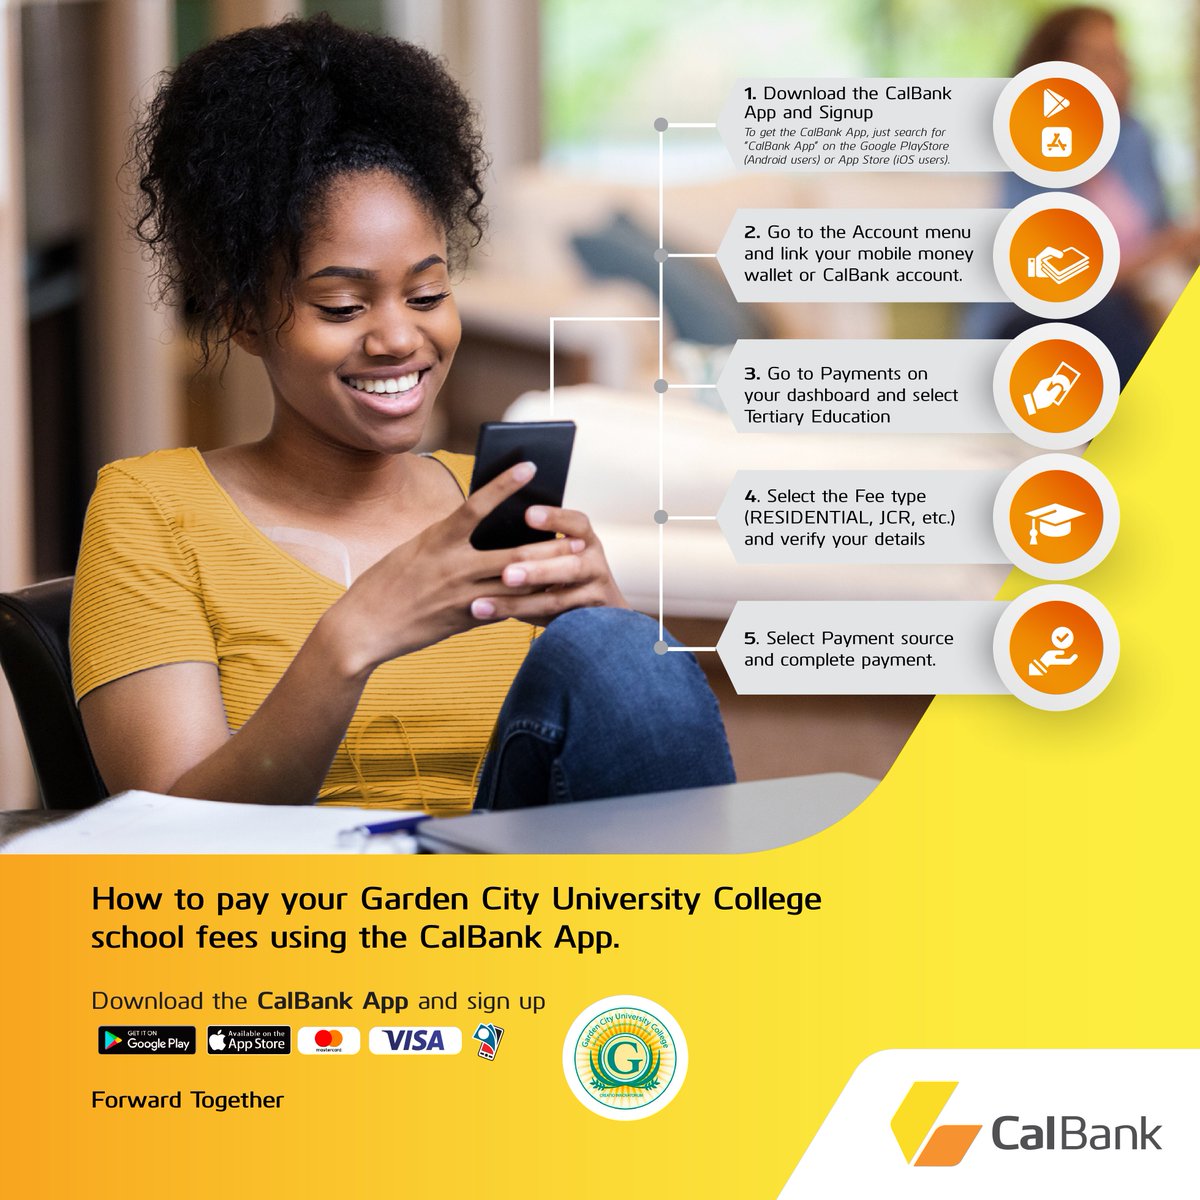 School bells are ringing, which can only mean one thing - it's back to school season!

As you prepare for school, don't stress about paying those fees. With the CalBank App, you can handle everything from the comfort of your home.

#CalBank #ForwardTogether #Backtoschool…